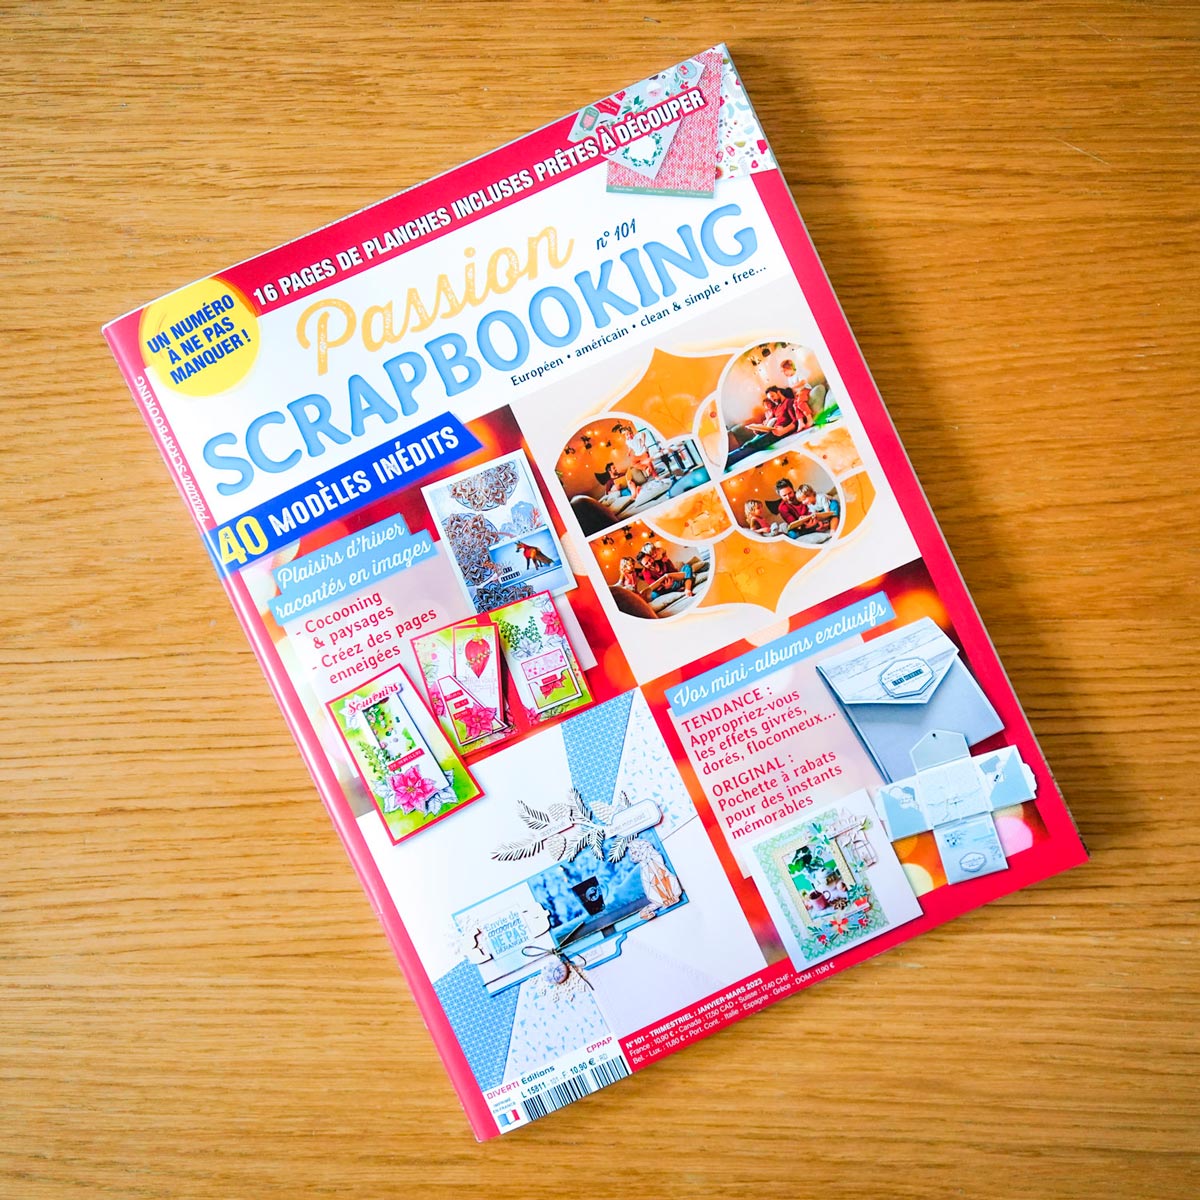 You are currently viewing Presse : Passion Scrapbooking